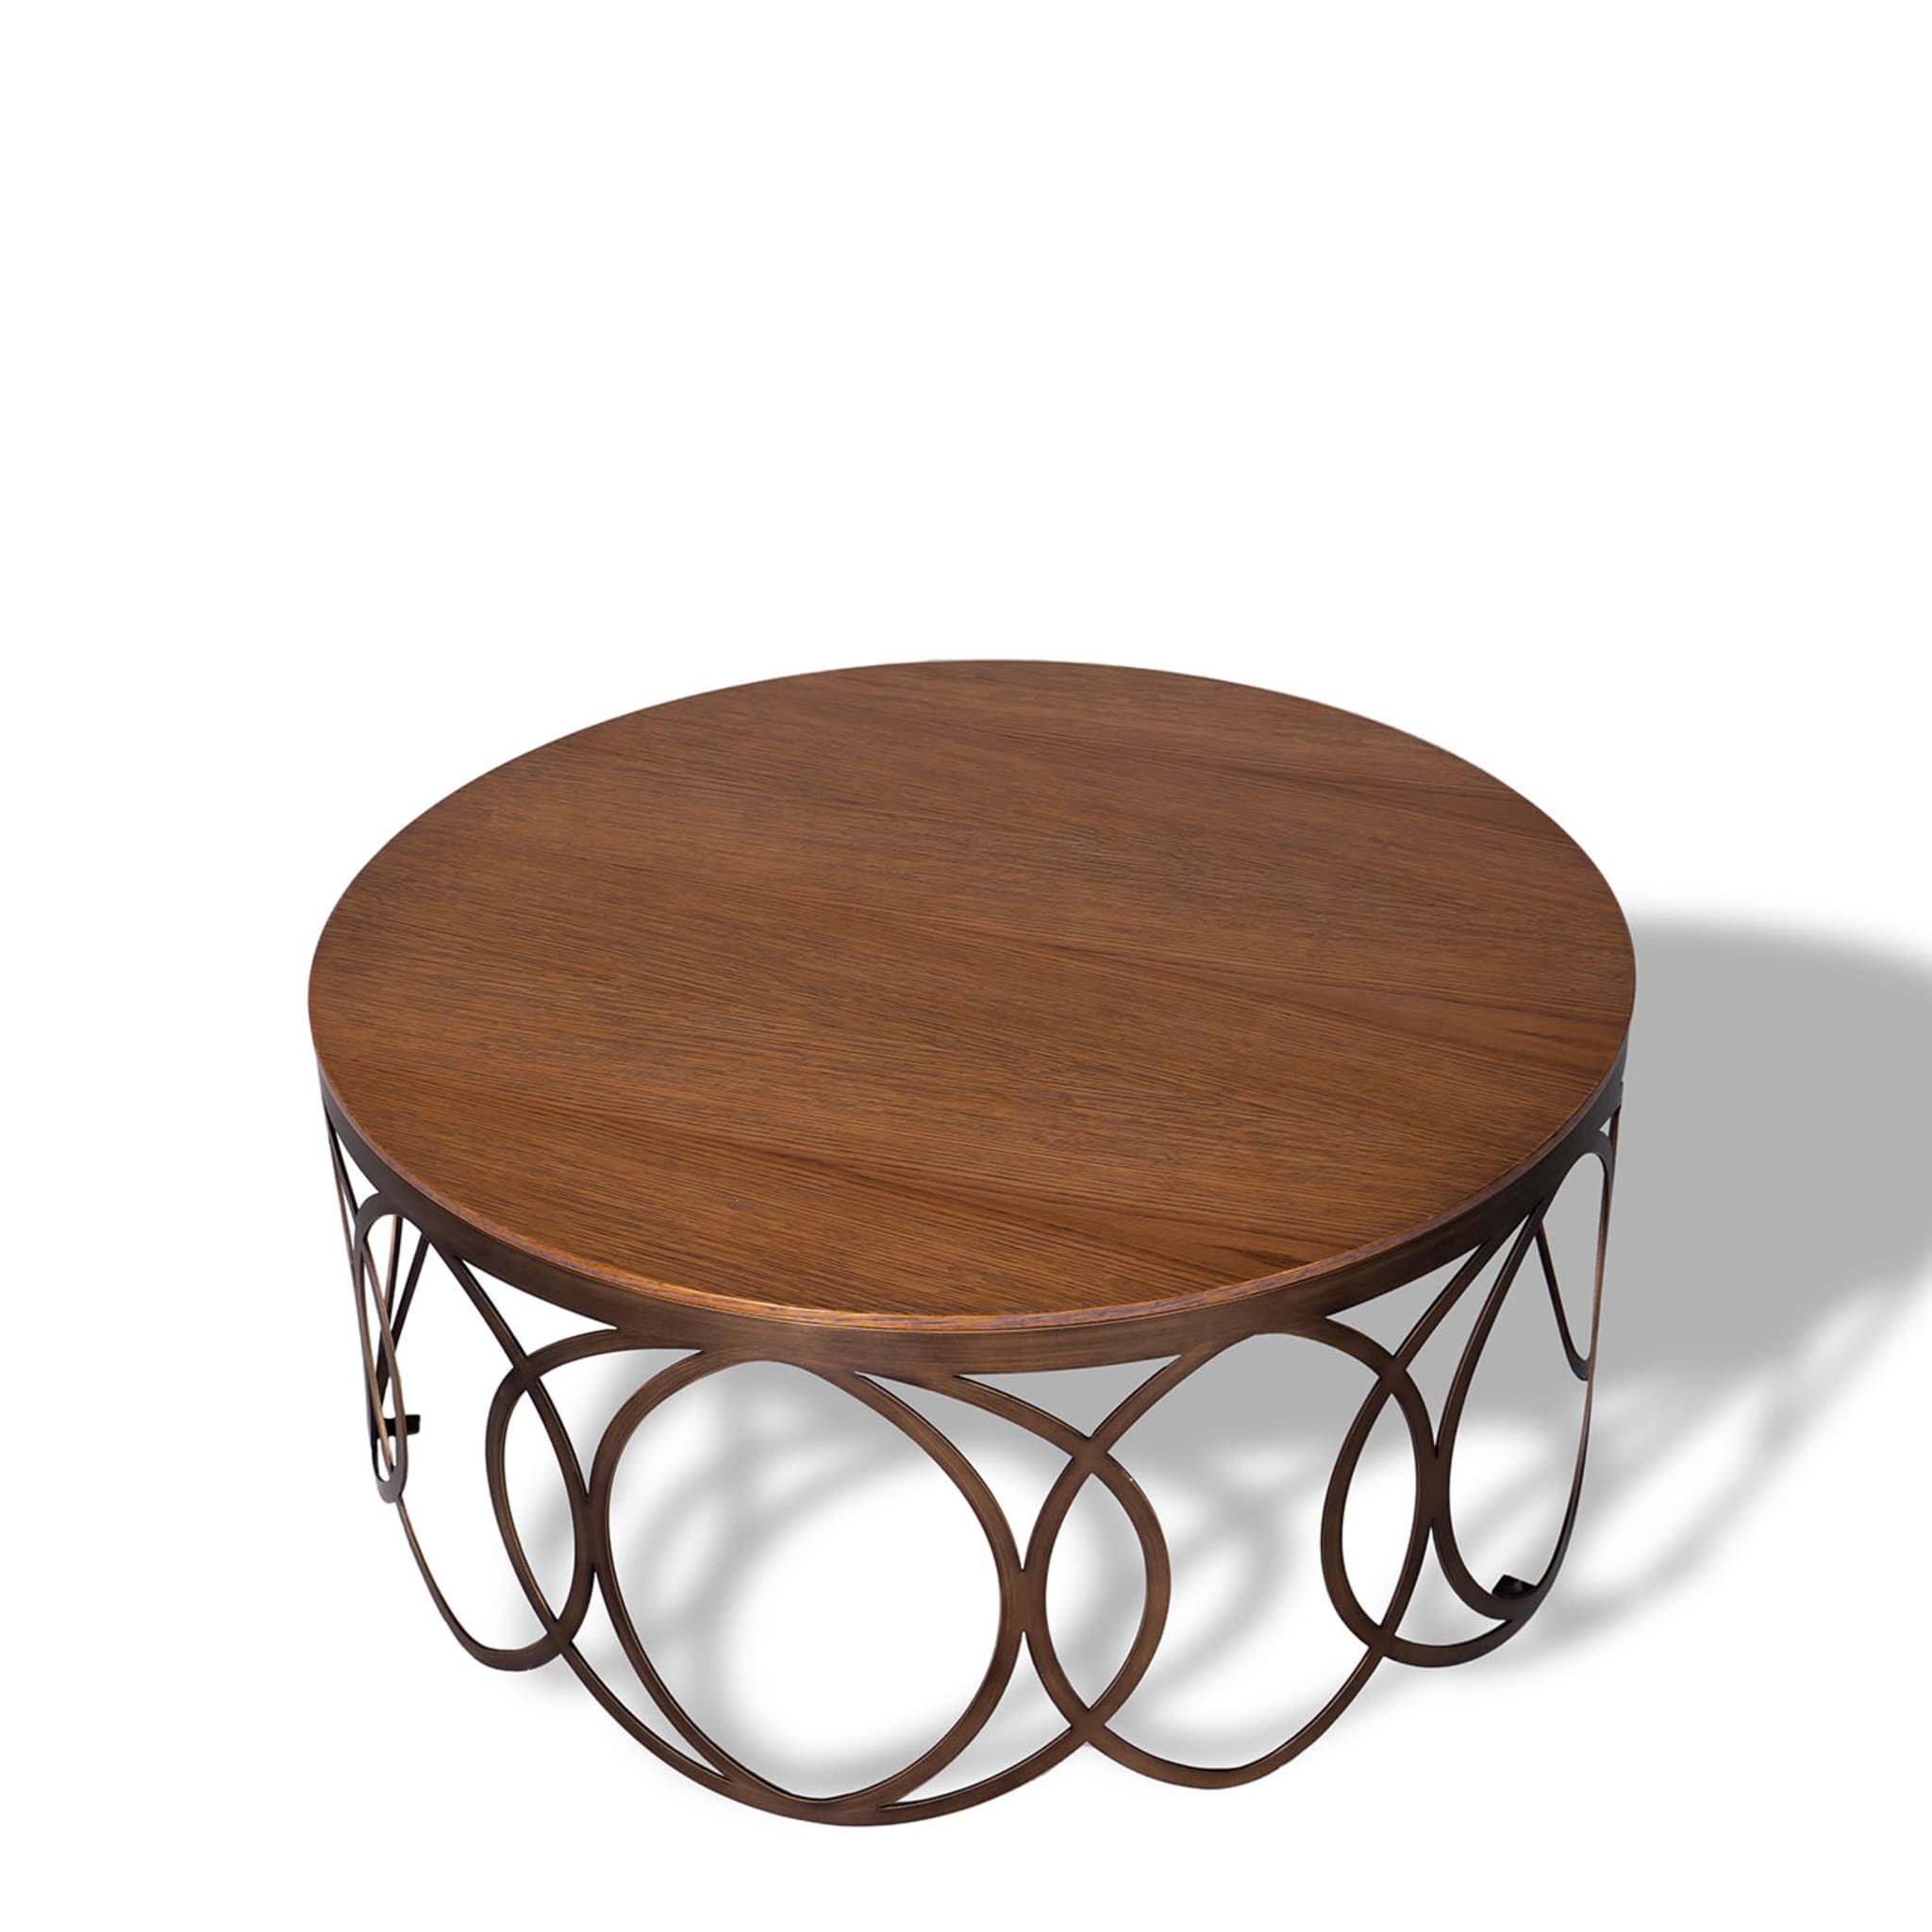 Valzer Coffee Table with Wooden Top - Alternative view 3